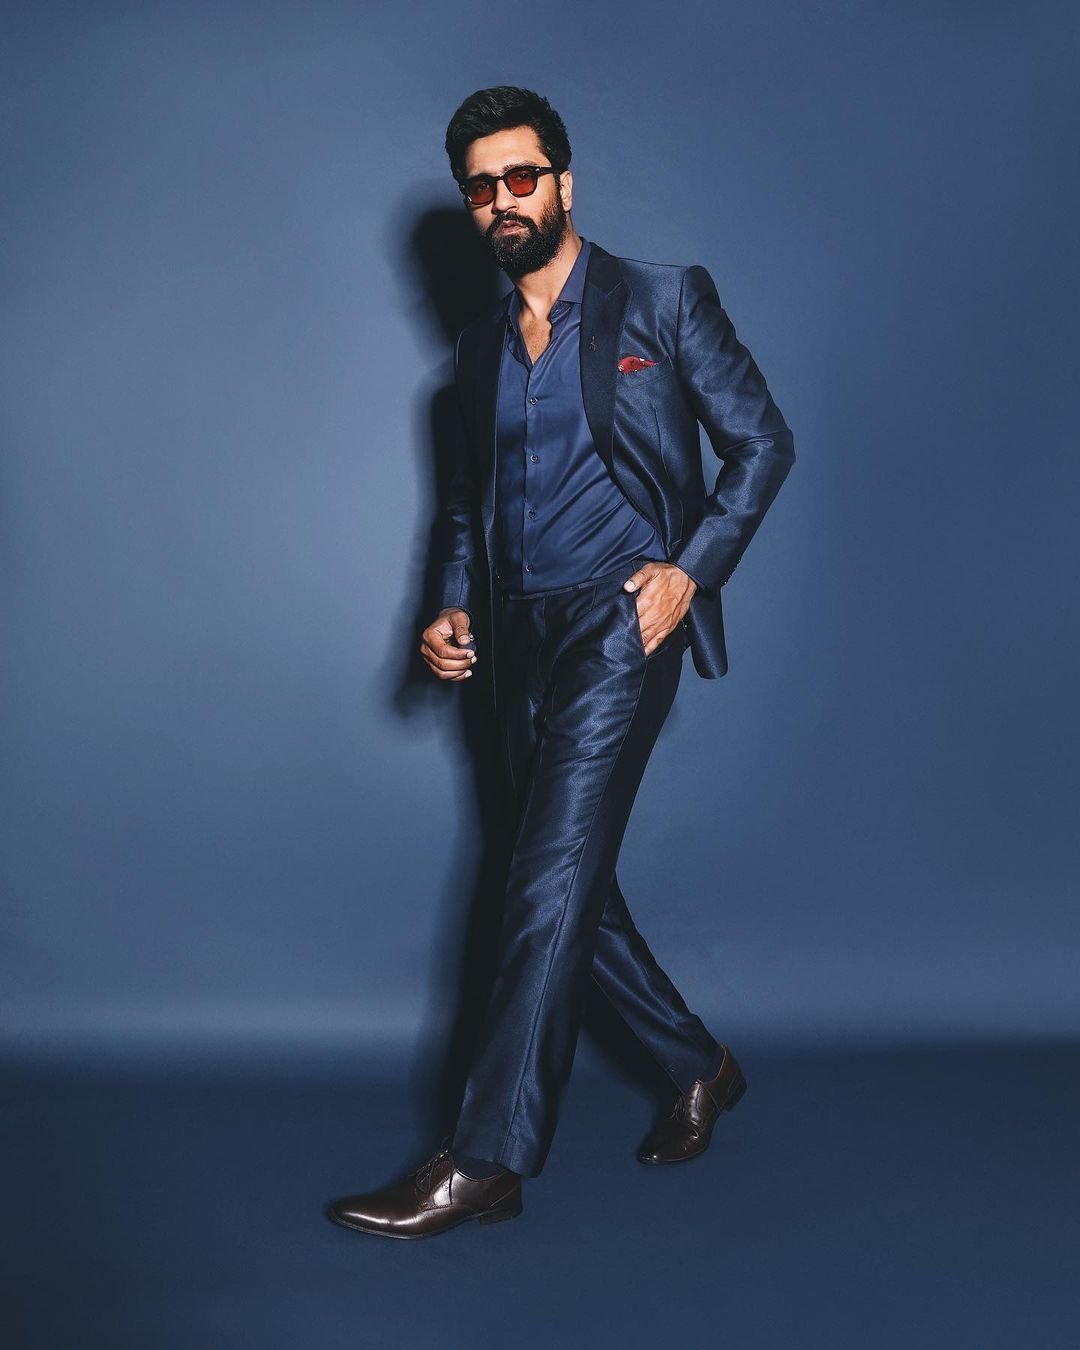 Vicky Kaushal looks suave in the dark blue suit and matching shirt